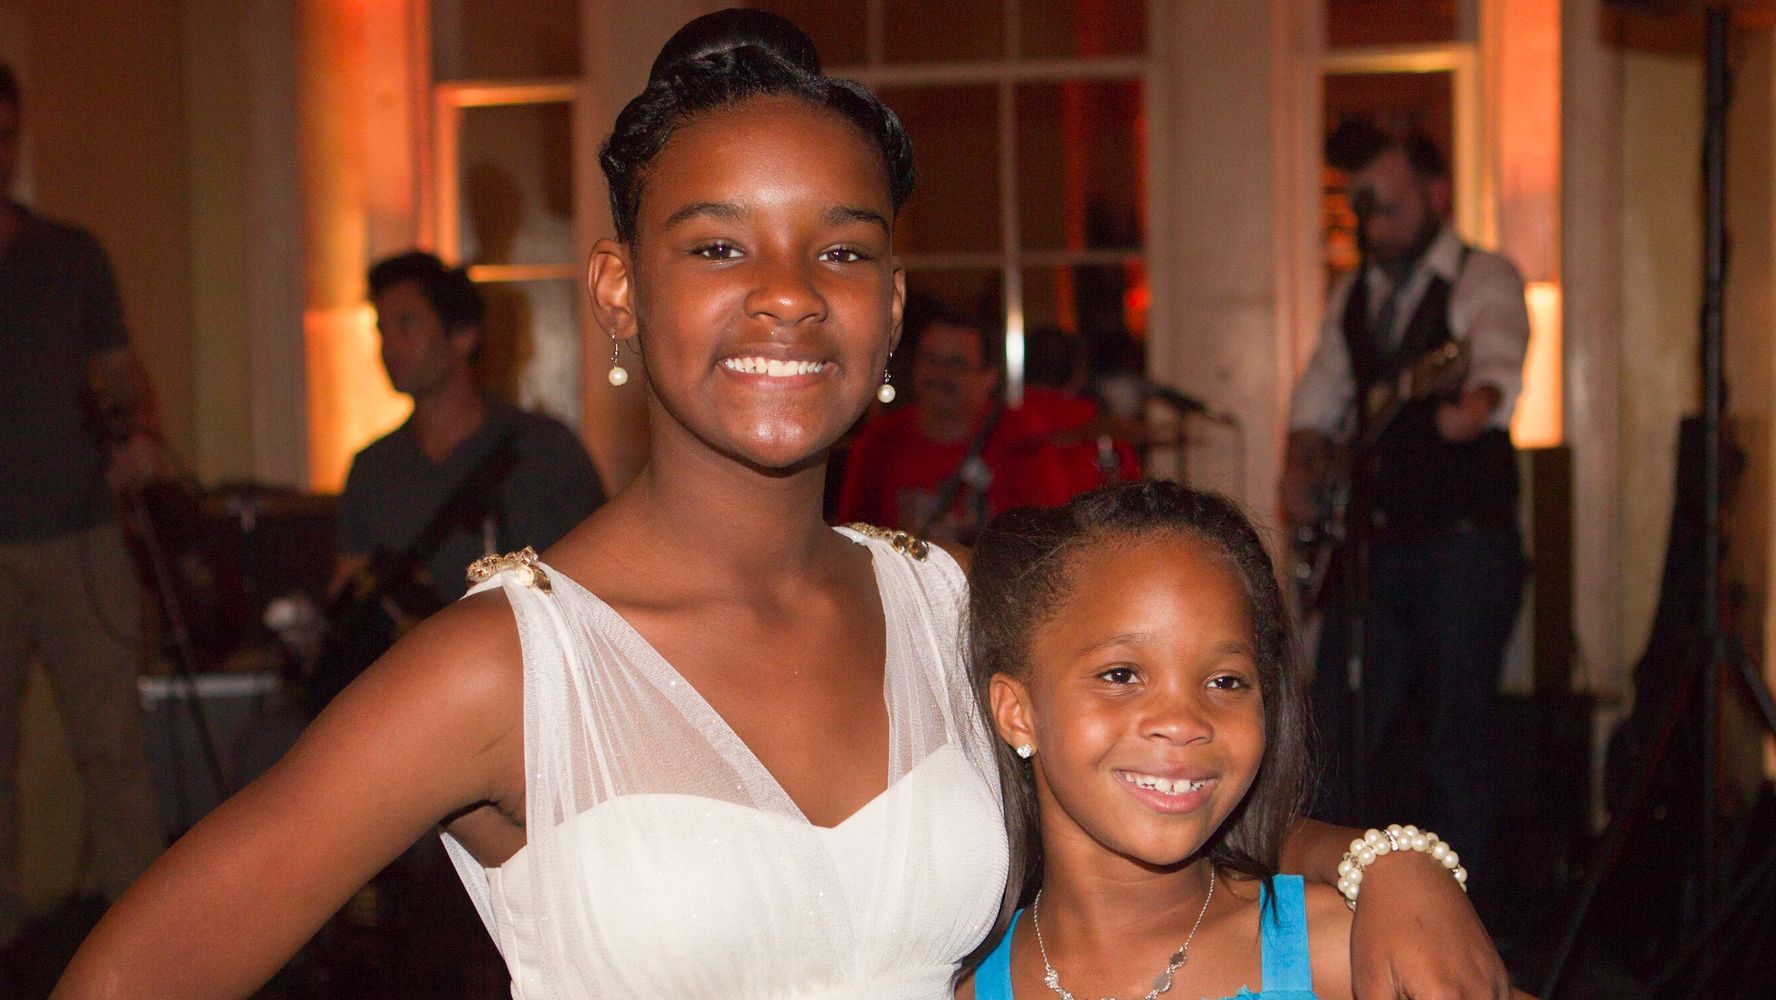 Jonshel Alexander, 'Beasts Of The Southern Wild' Star, Dead At Age 22 | HuffPost Entertainment